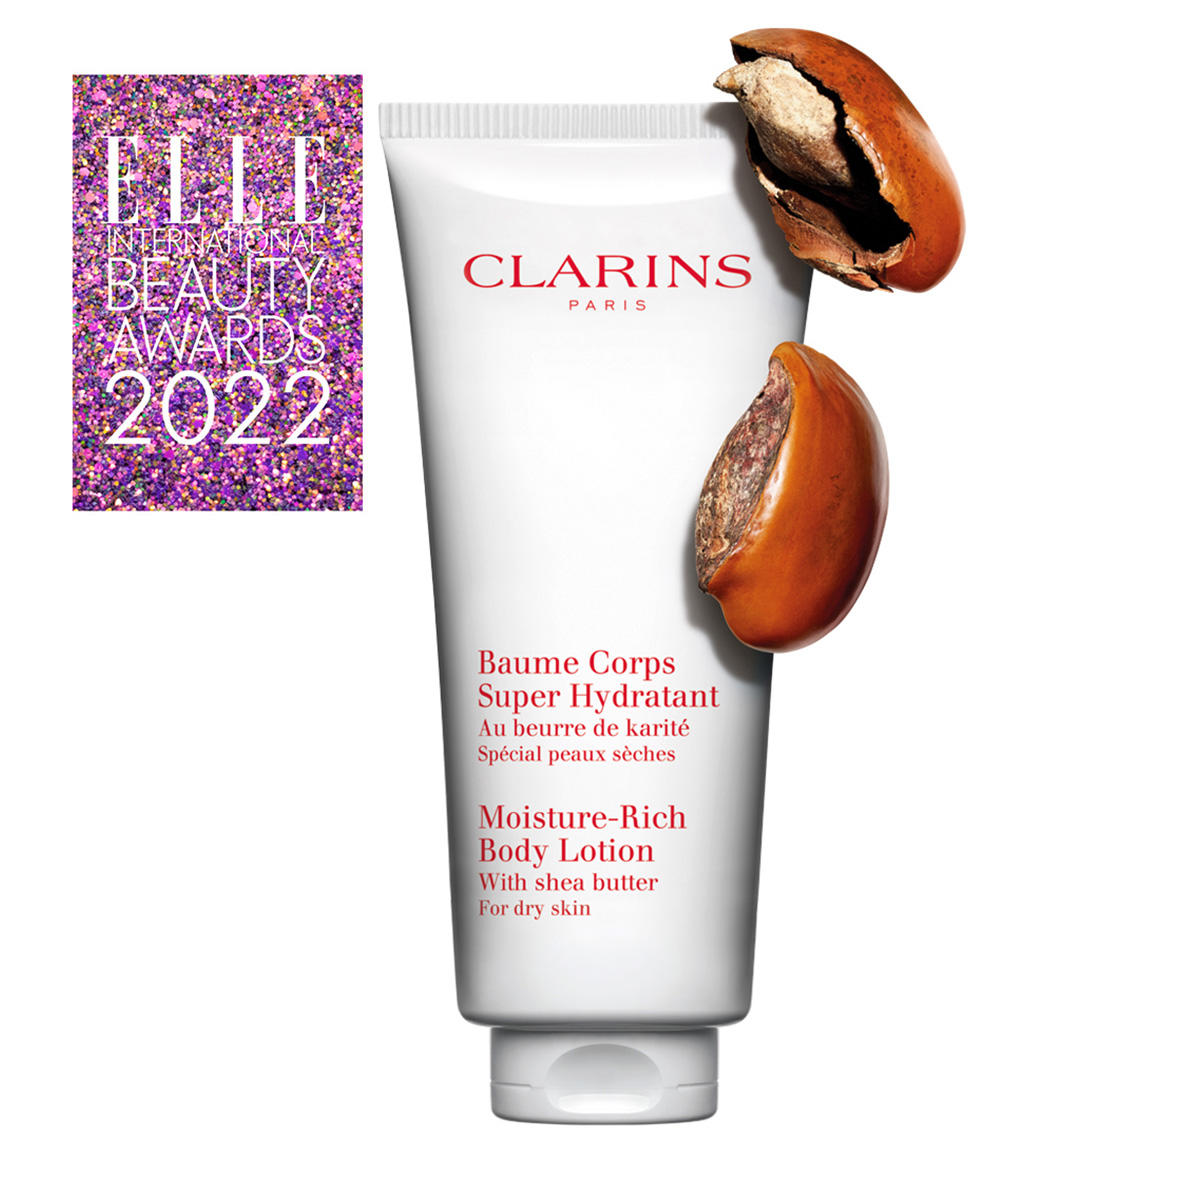 CLARINS Baume Corps Super Hydratant 200 ml - 2